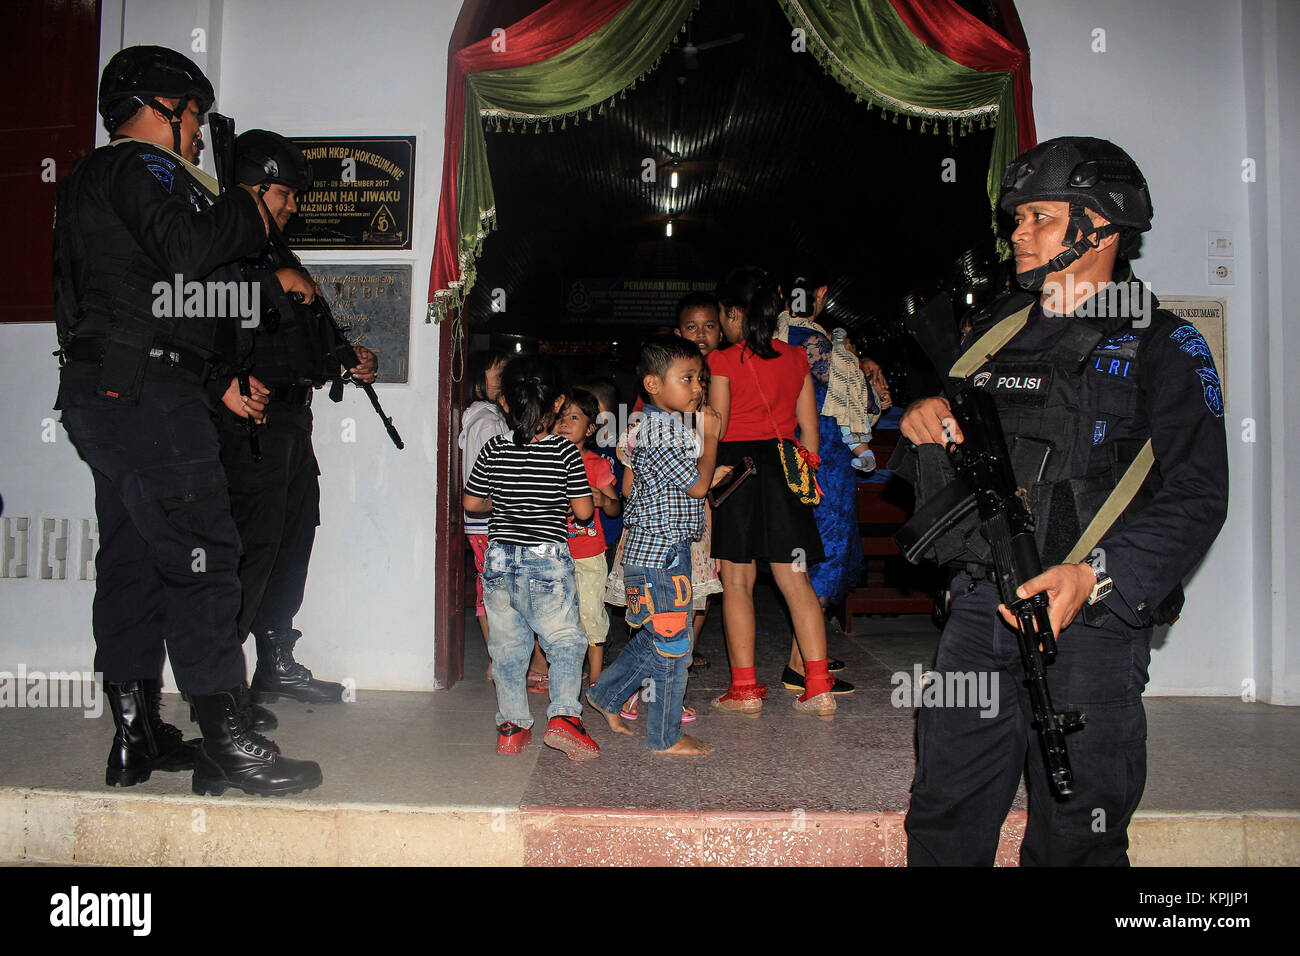 Lhokseumawe, Aceh, Indonesia. 16th Dec, 2017. Several children walk through the policemen agents while heading to the praying room inside the church. Indonesian police conduct routine patrols to prevent anti-terror threats at Lhokseumawe City Church in Aceh. The Indonesian National Police has announced the security and comfort readiness for Christians during the process of celebrating Christmas and welcoming the 2018 new year in Indonesia. Credit: SOPA/ZUMA Wire/Alamy Live News Stock Photo